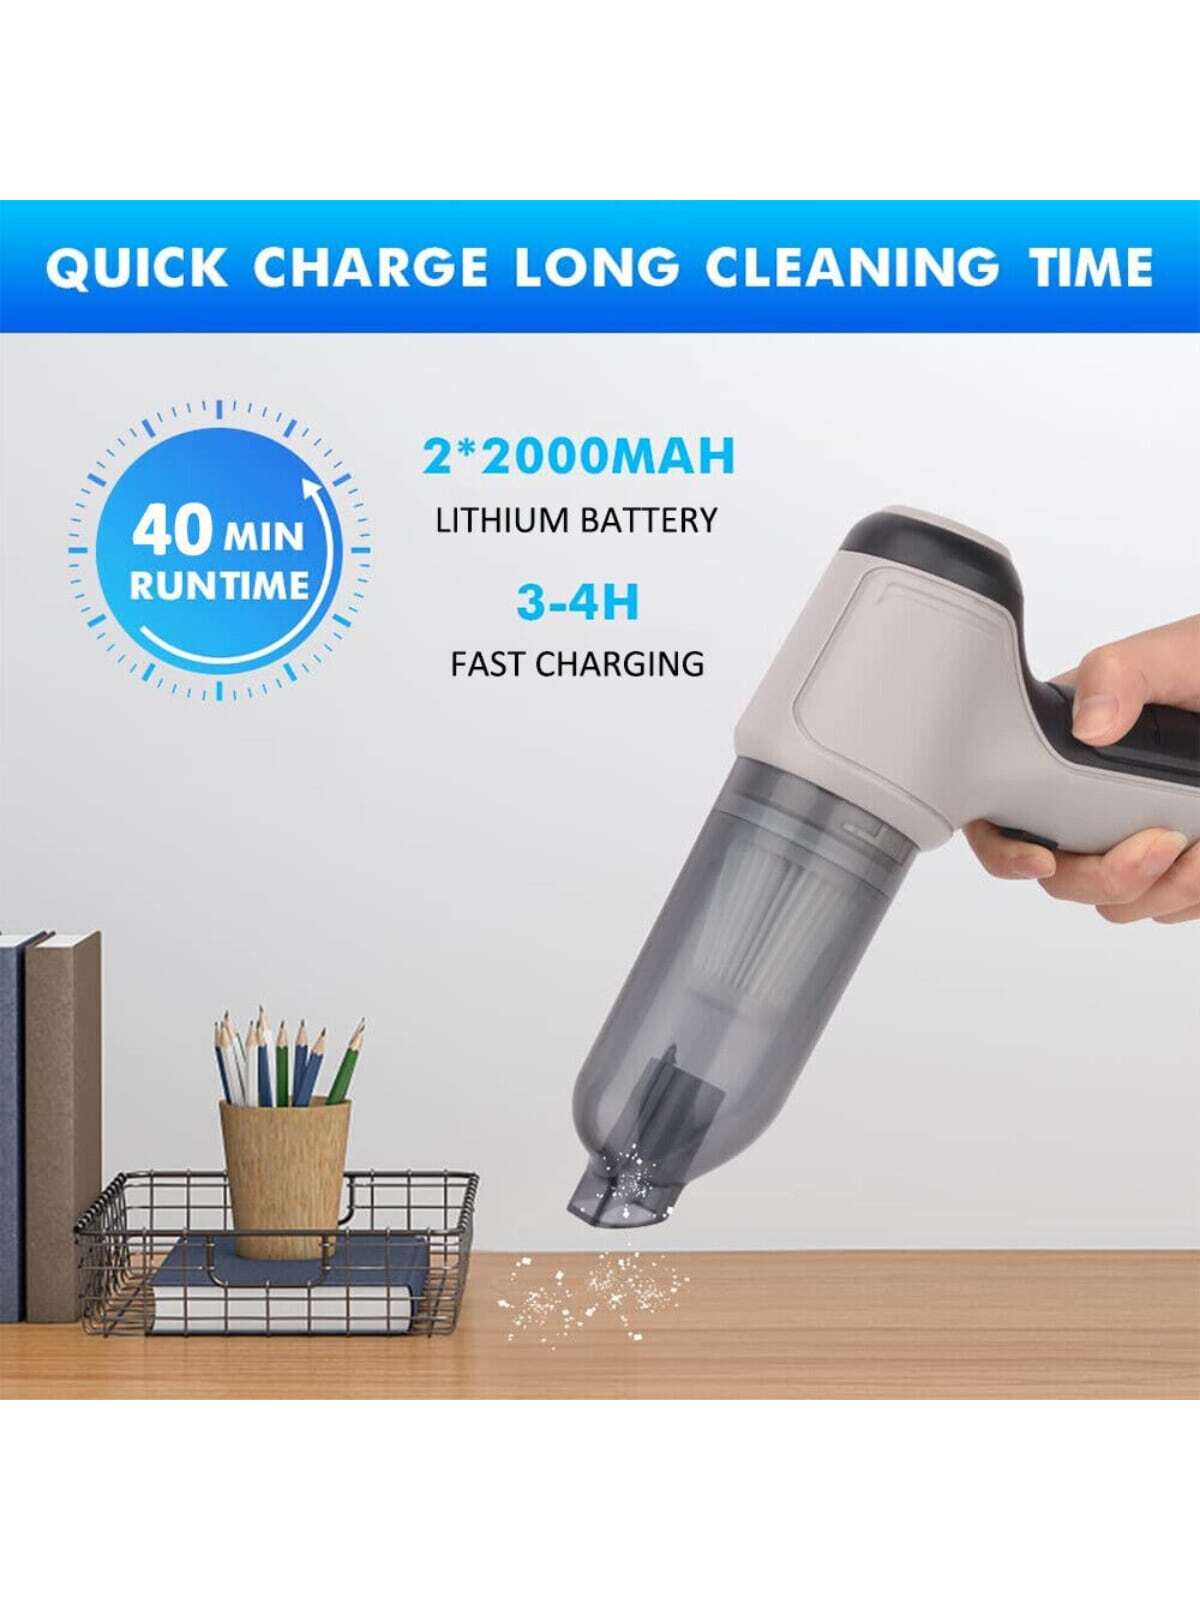 Car Vacuum Cleaner Duster Cordless Portable Rechargeable Wet&Dry